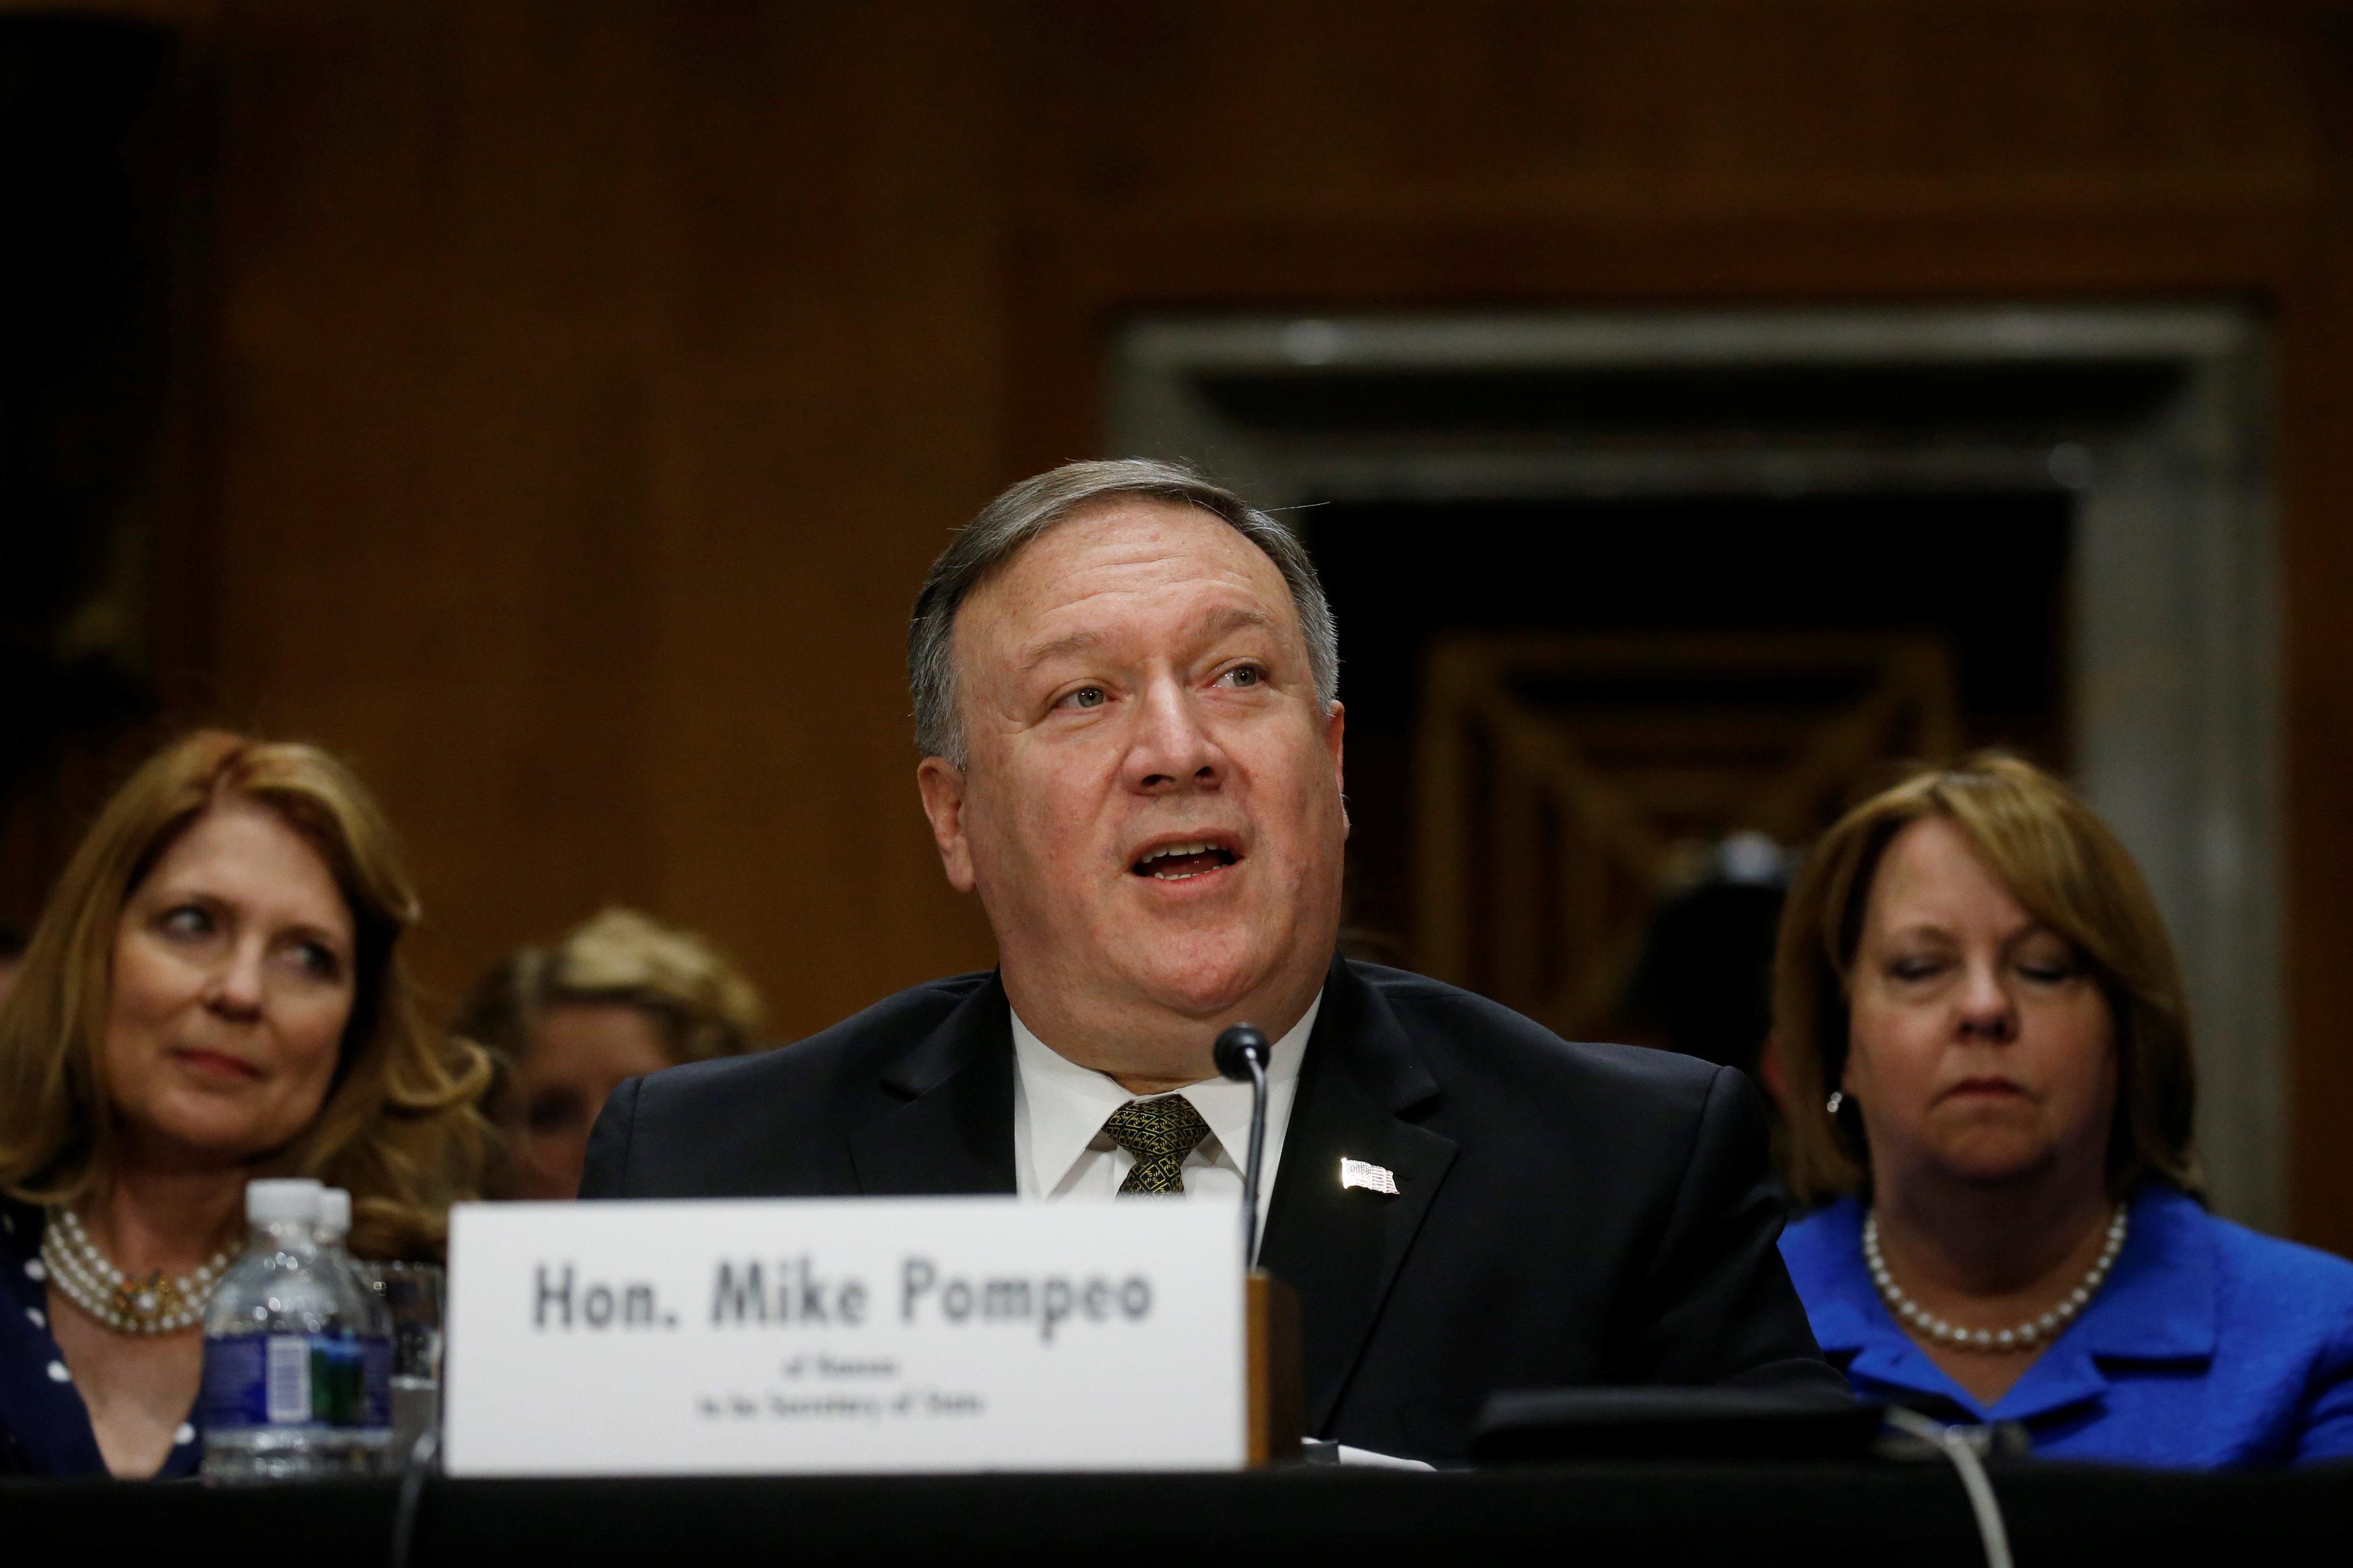 Pompeo tells that North Korea not clear on extent of shutting Yongbyon facility